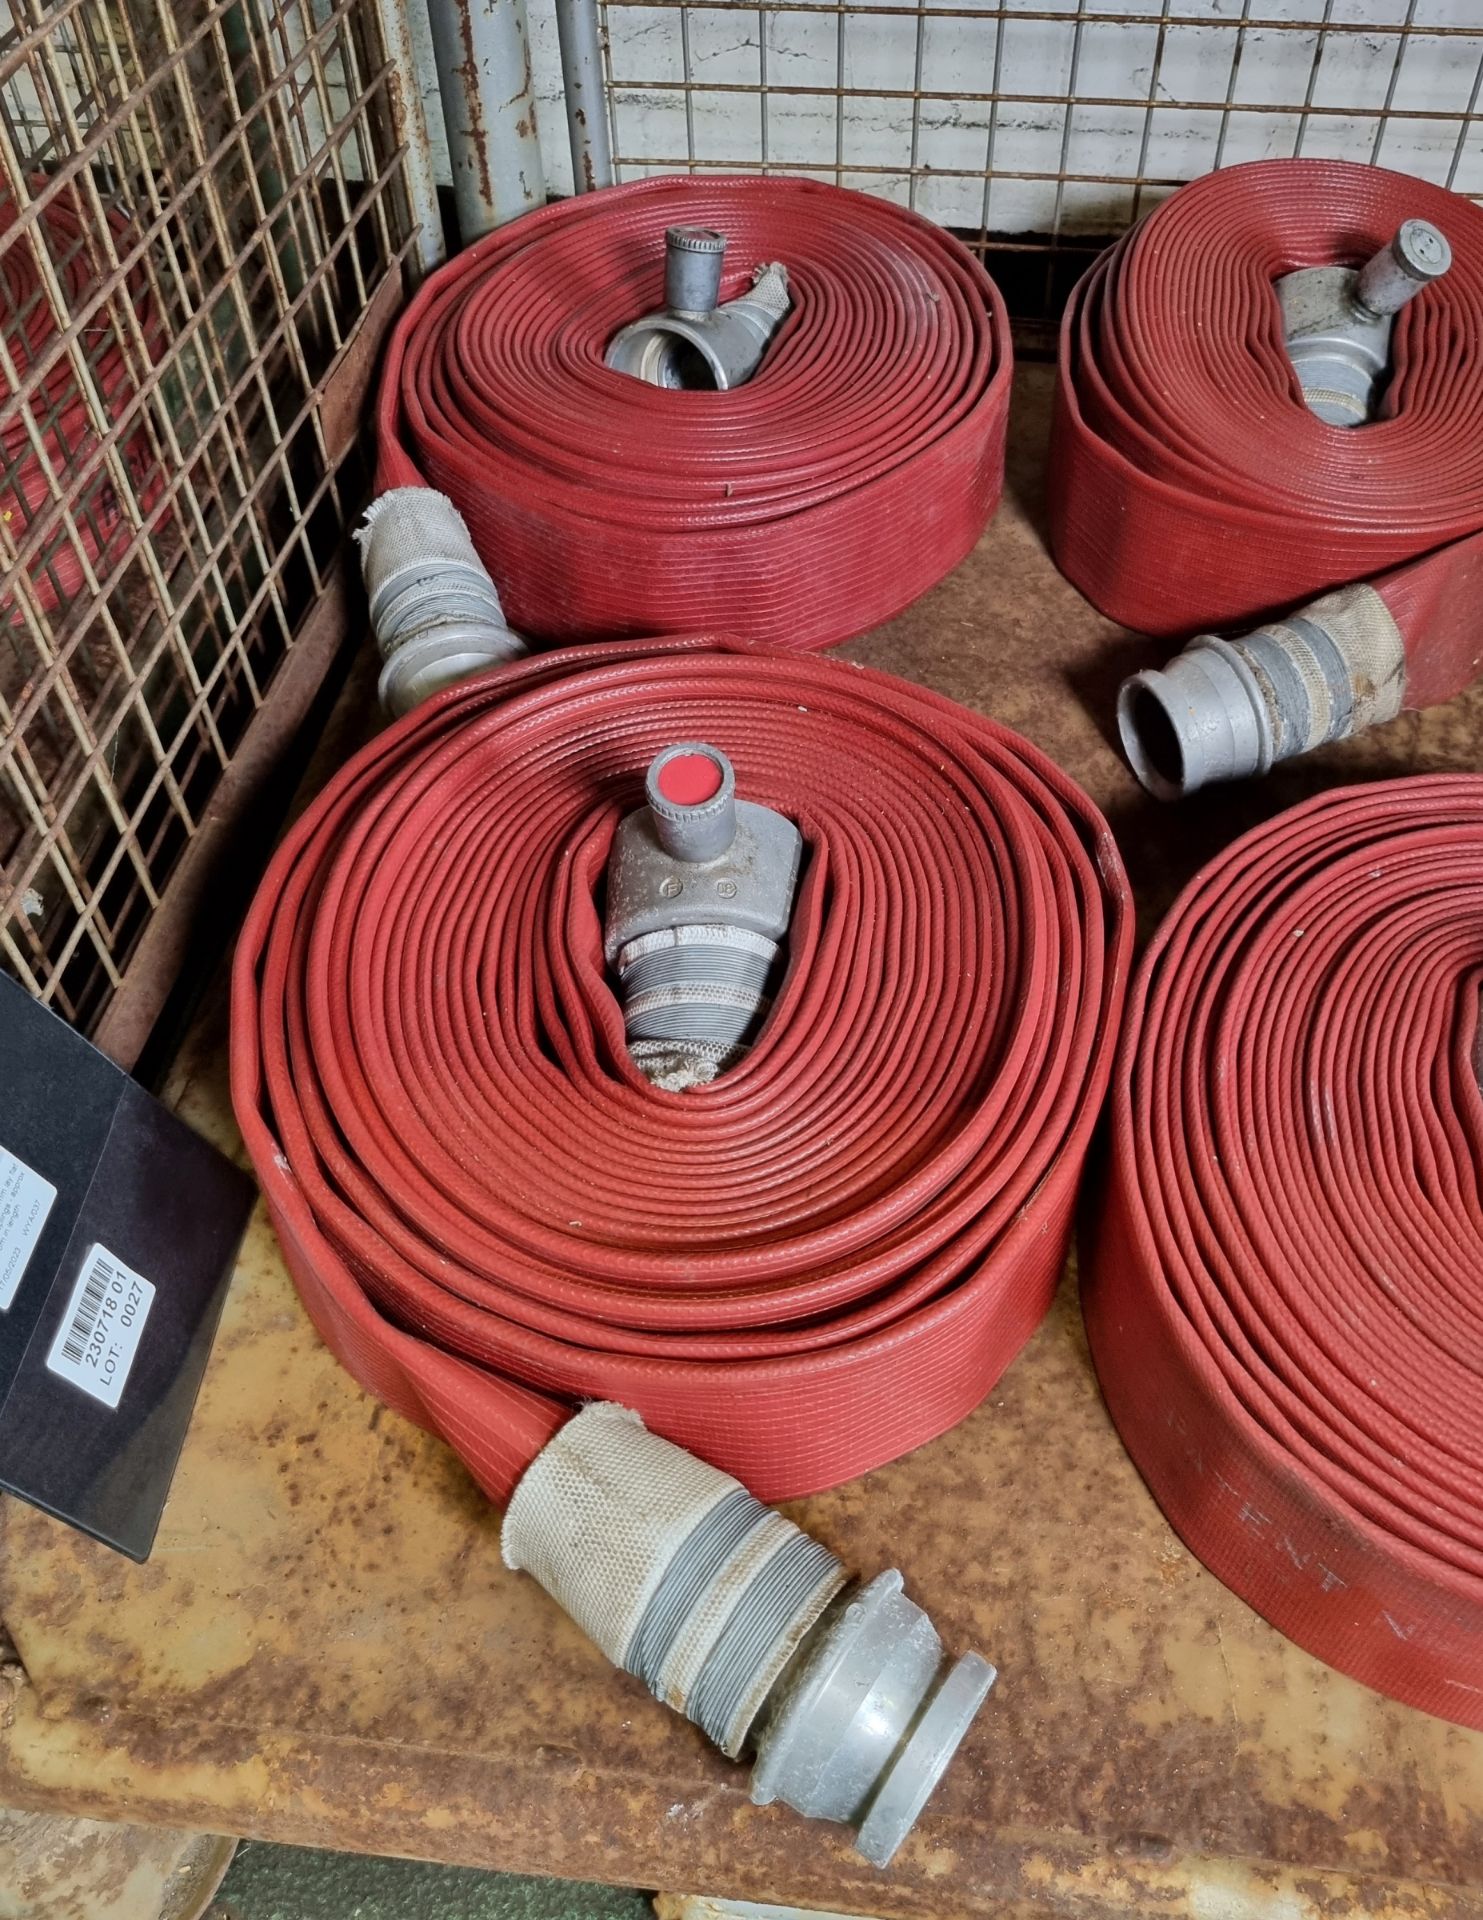 6x Angus Duraline 64mm lay flat hoses with couplings - approx 15m in length - Image 5 of 5